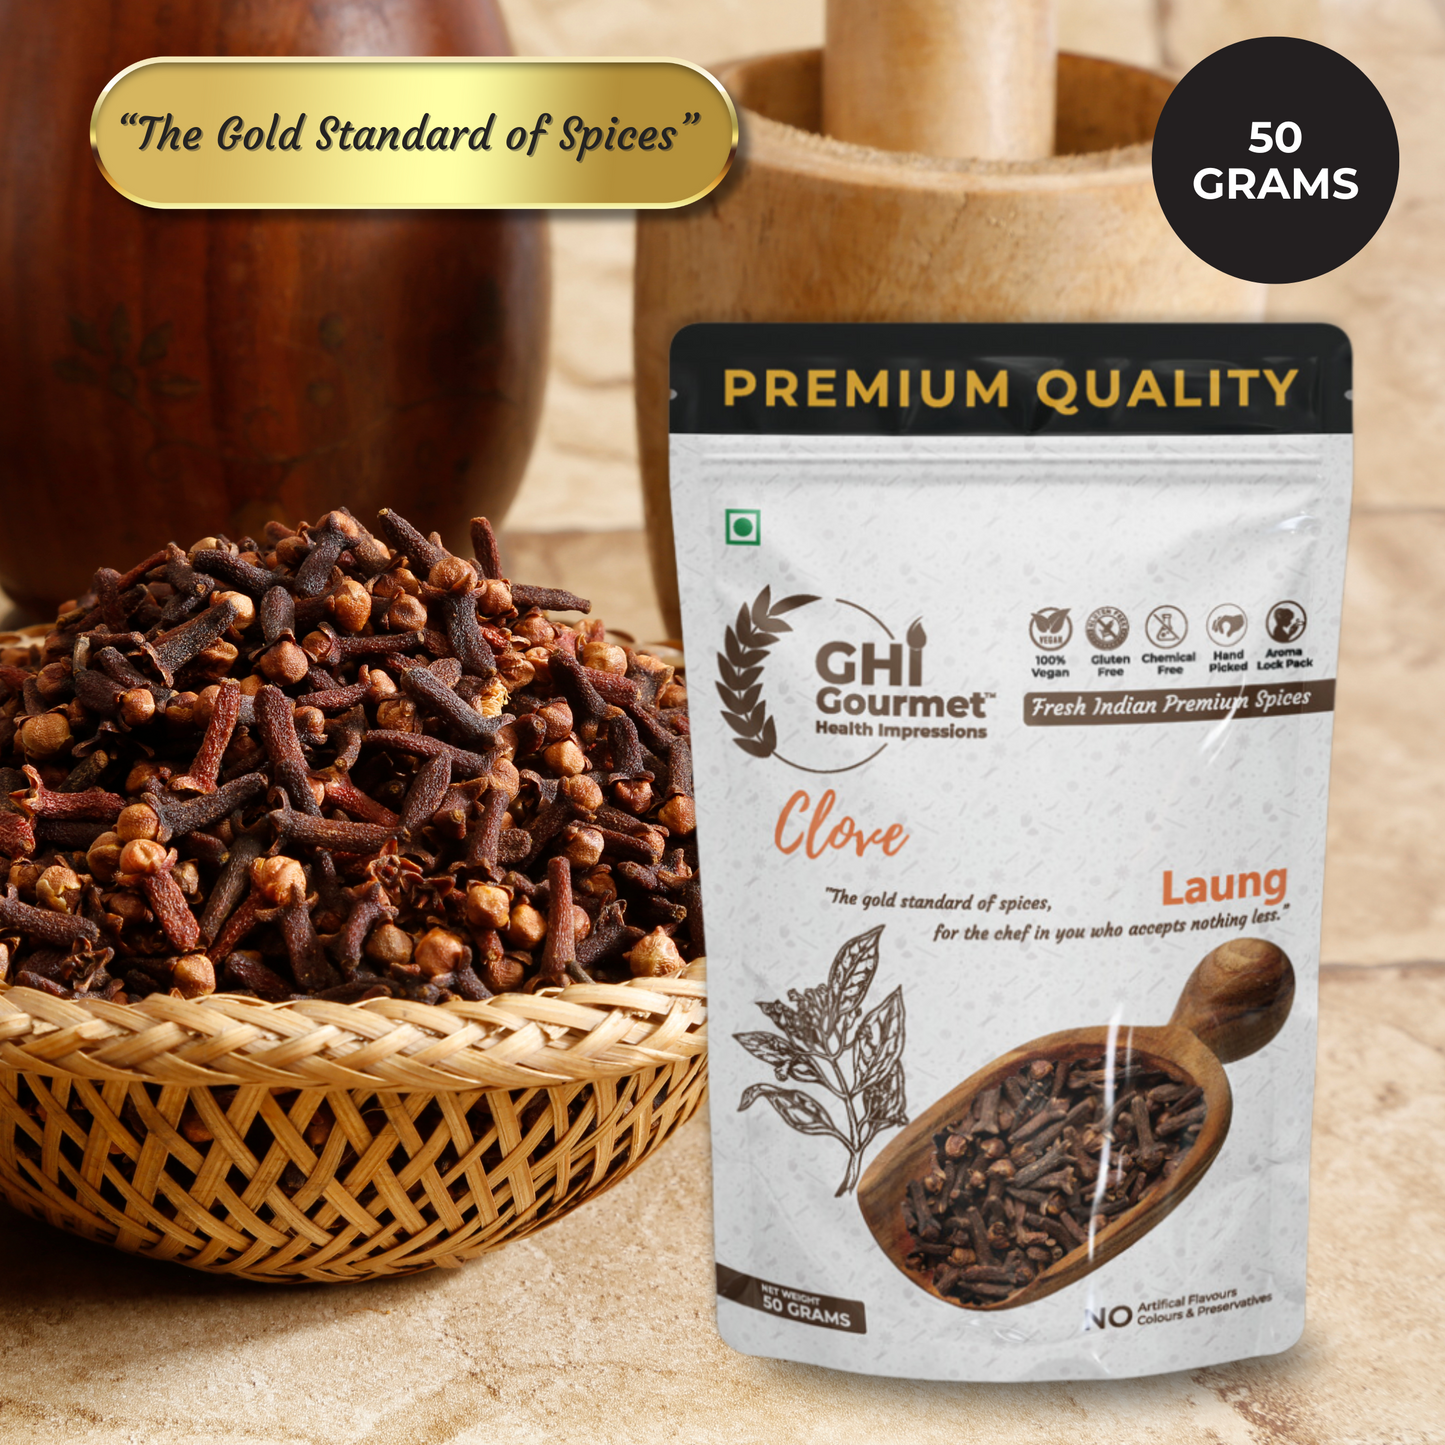 Spice Combo Pack, 6 Essential Indian Spices, Whole Black Pepper 100g, Whole Clove 50, Whole Green Cardamom 8mm+ 50g, Black Pepper Powder 75g, Cinnamon Powder 75g, Cardamom Powder 75g